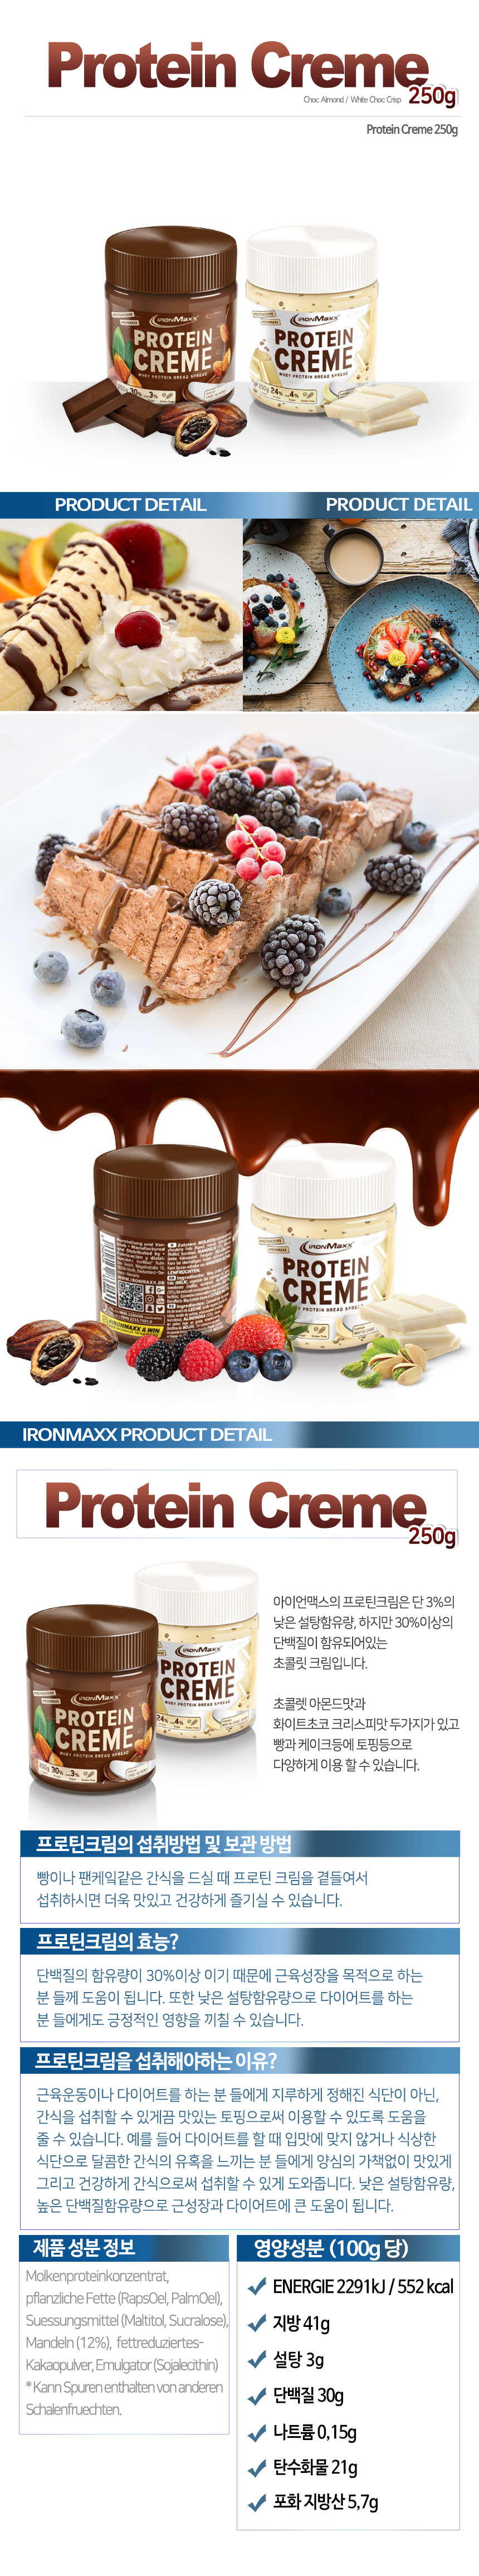 %255Bok%255DProtein-creme_093557.png